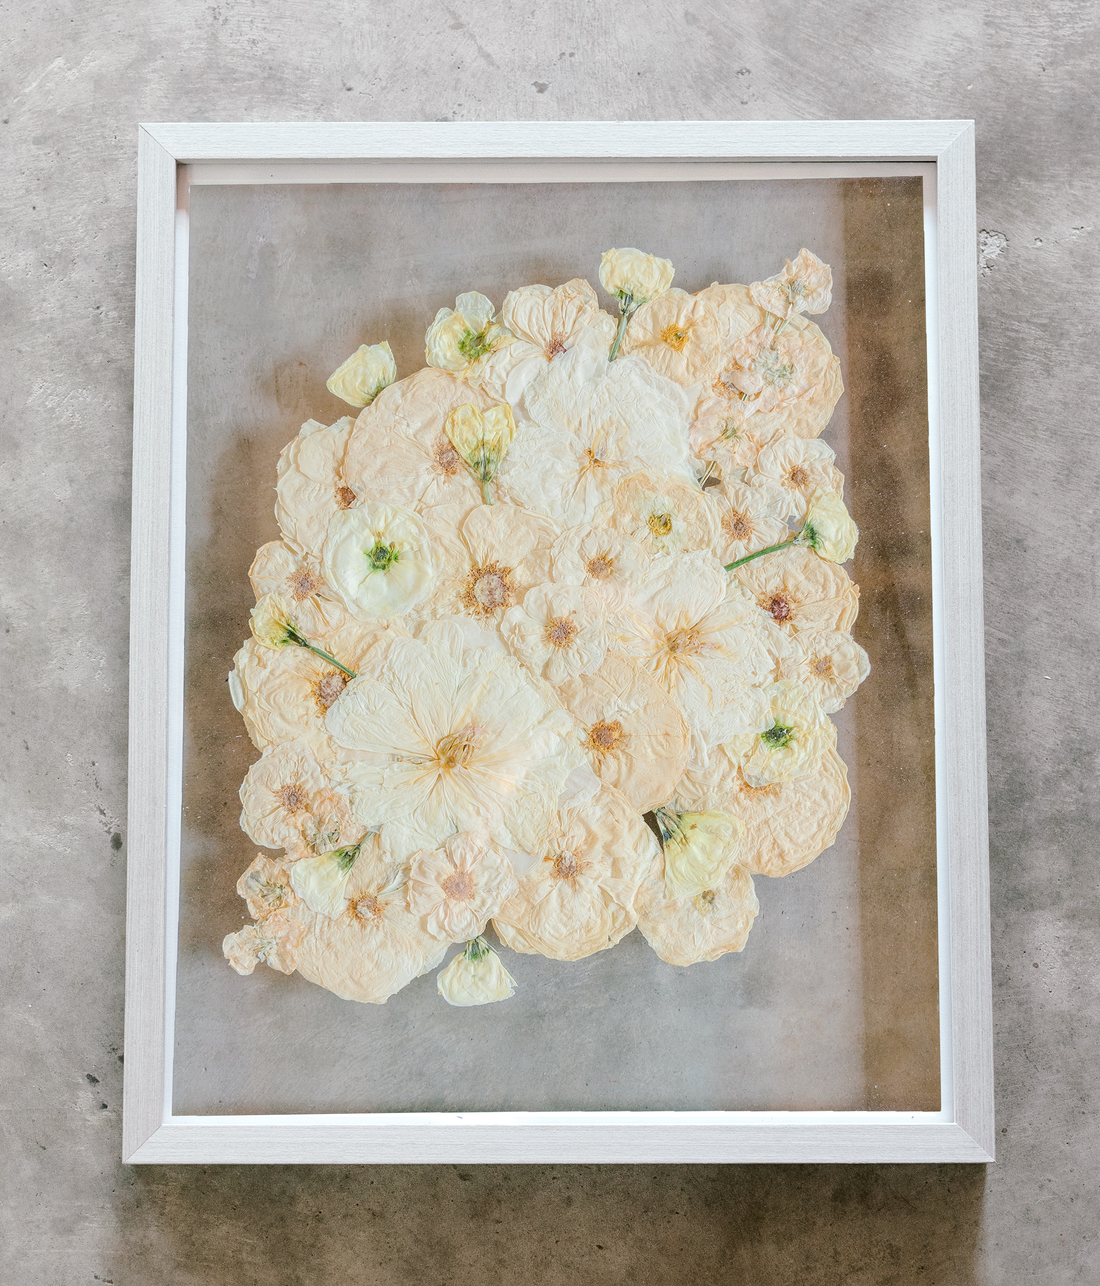 An all white ball bouquet pressed and preserved into a gray frame against concrete.